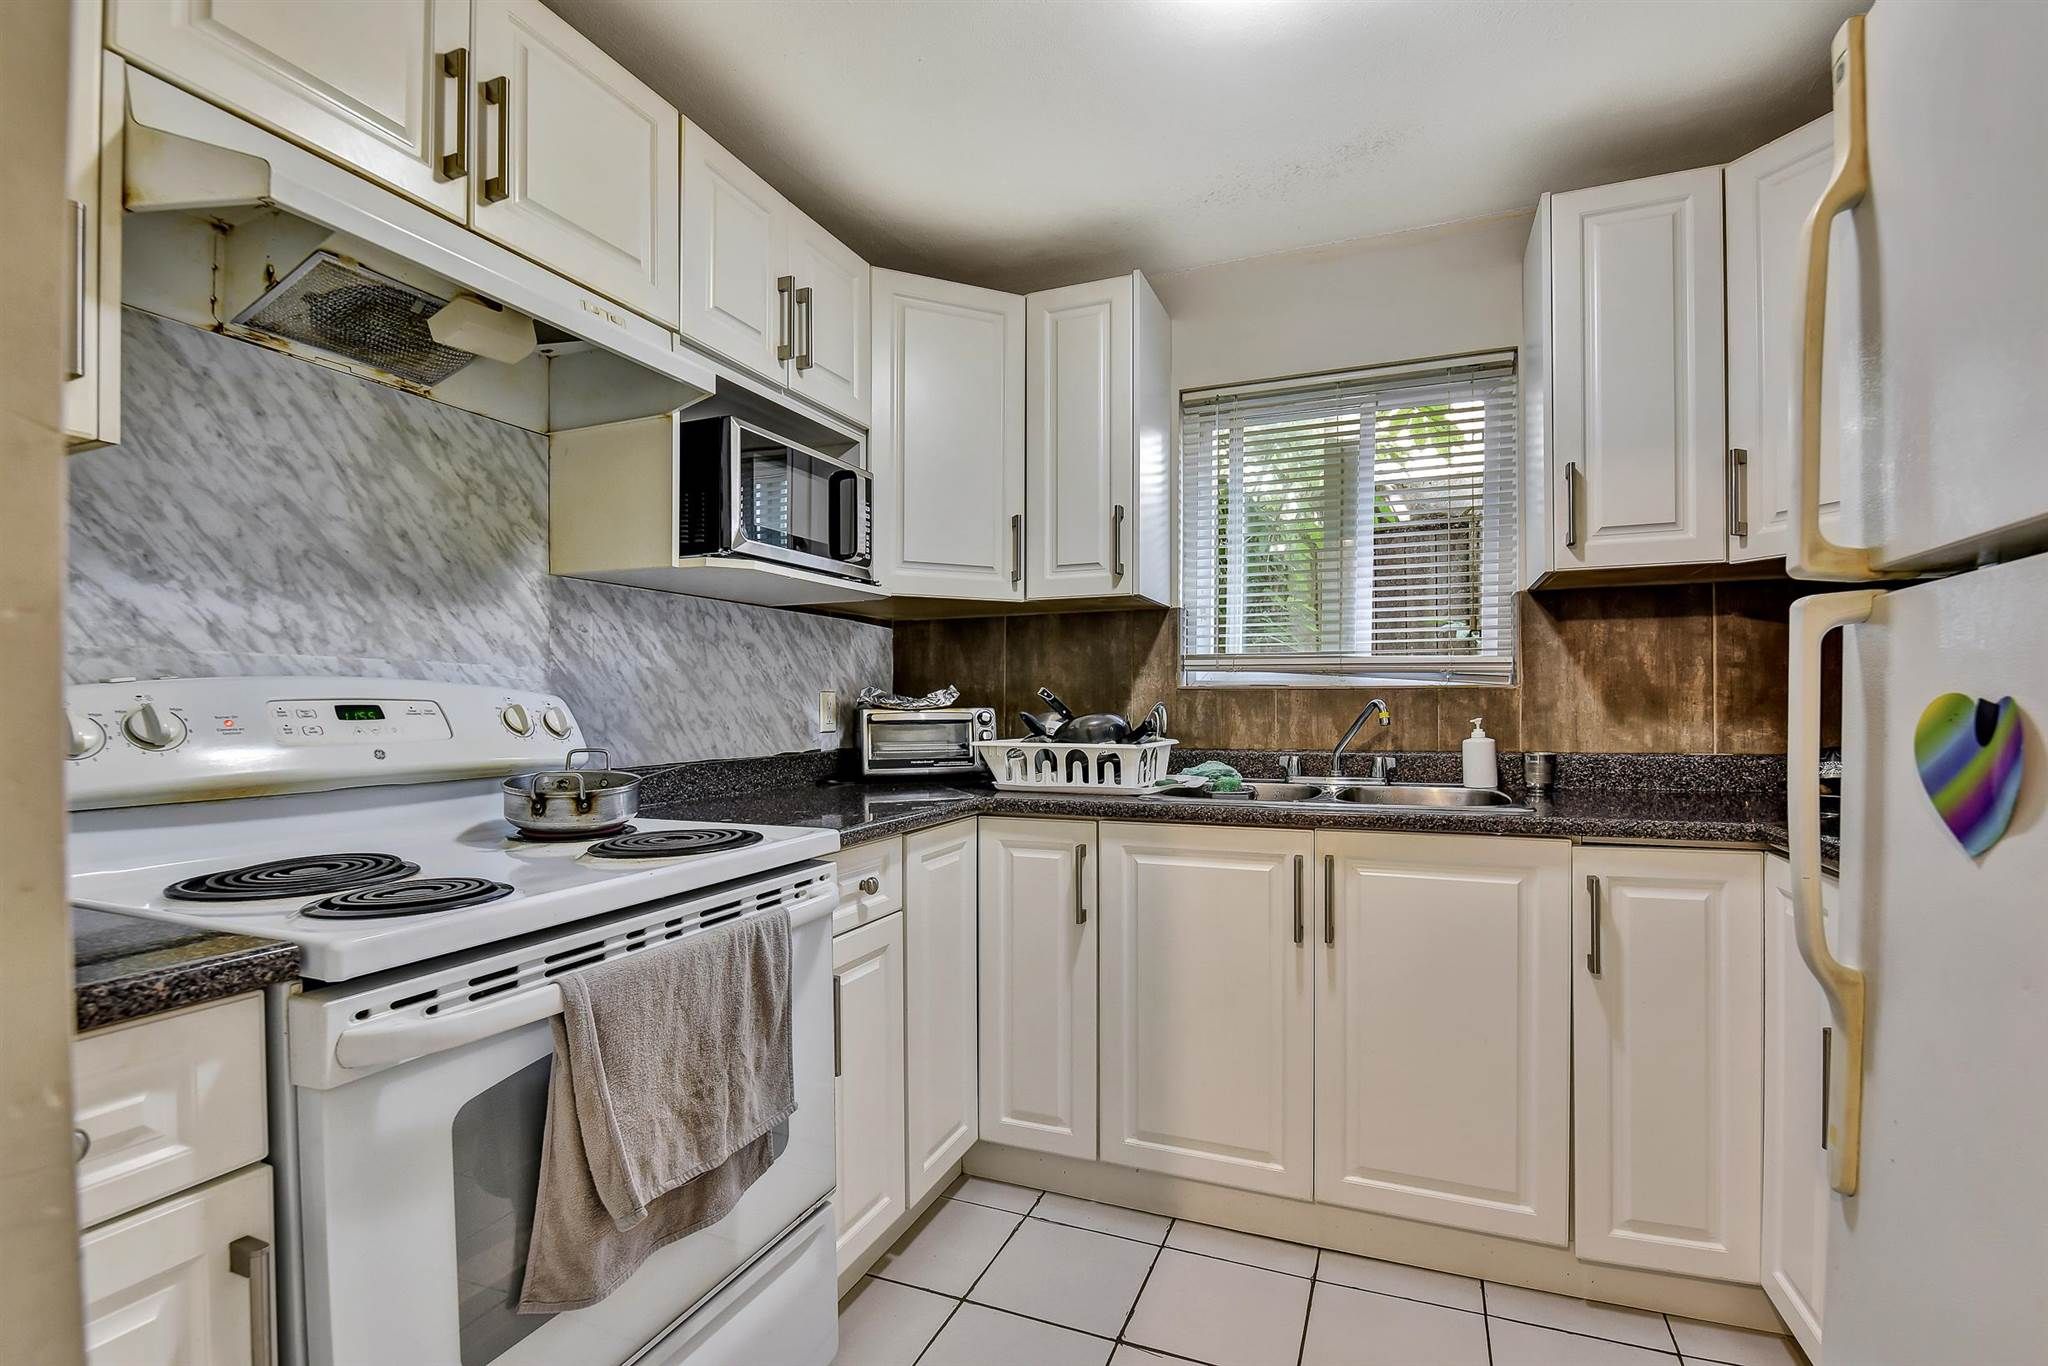 Photo 28: Photos: 11925 GILMOUR Crescent in Delta: Scottsdale House for sale (N. Delta)  : MLS®# R2594059